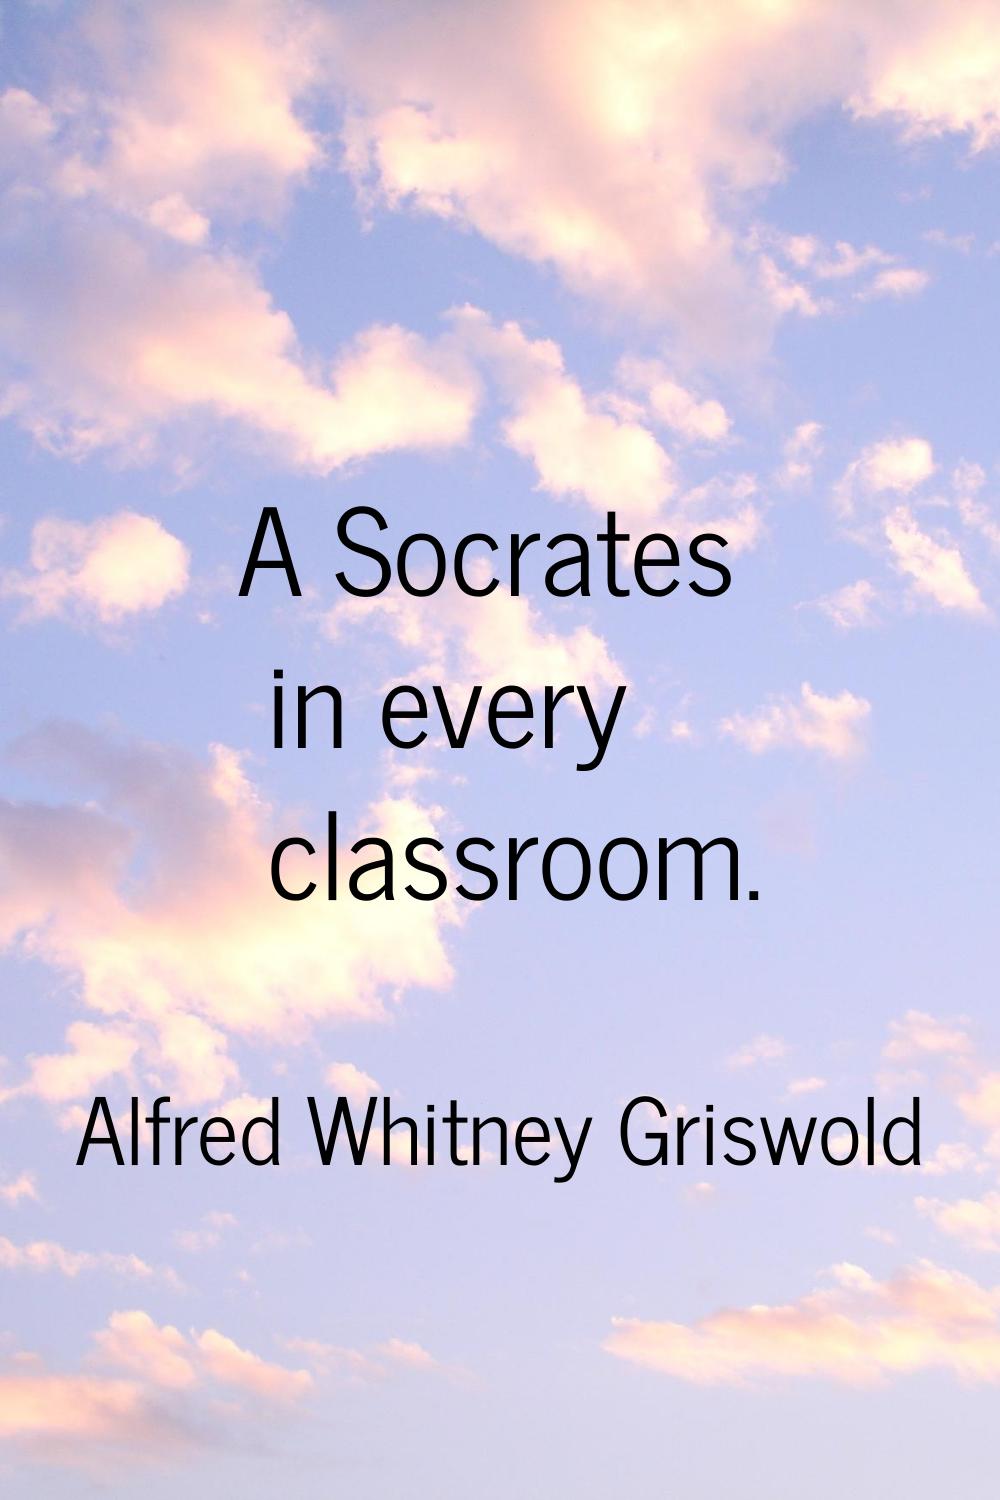 A Socrates in every classroom.